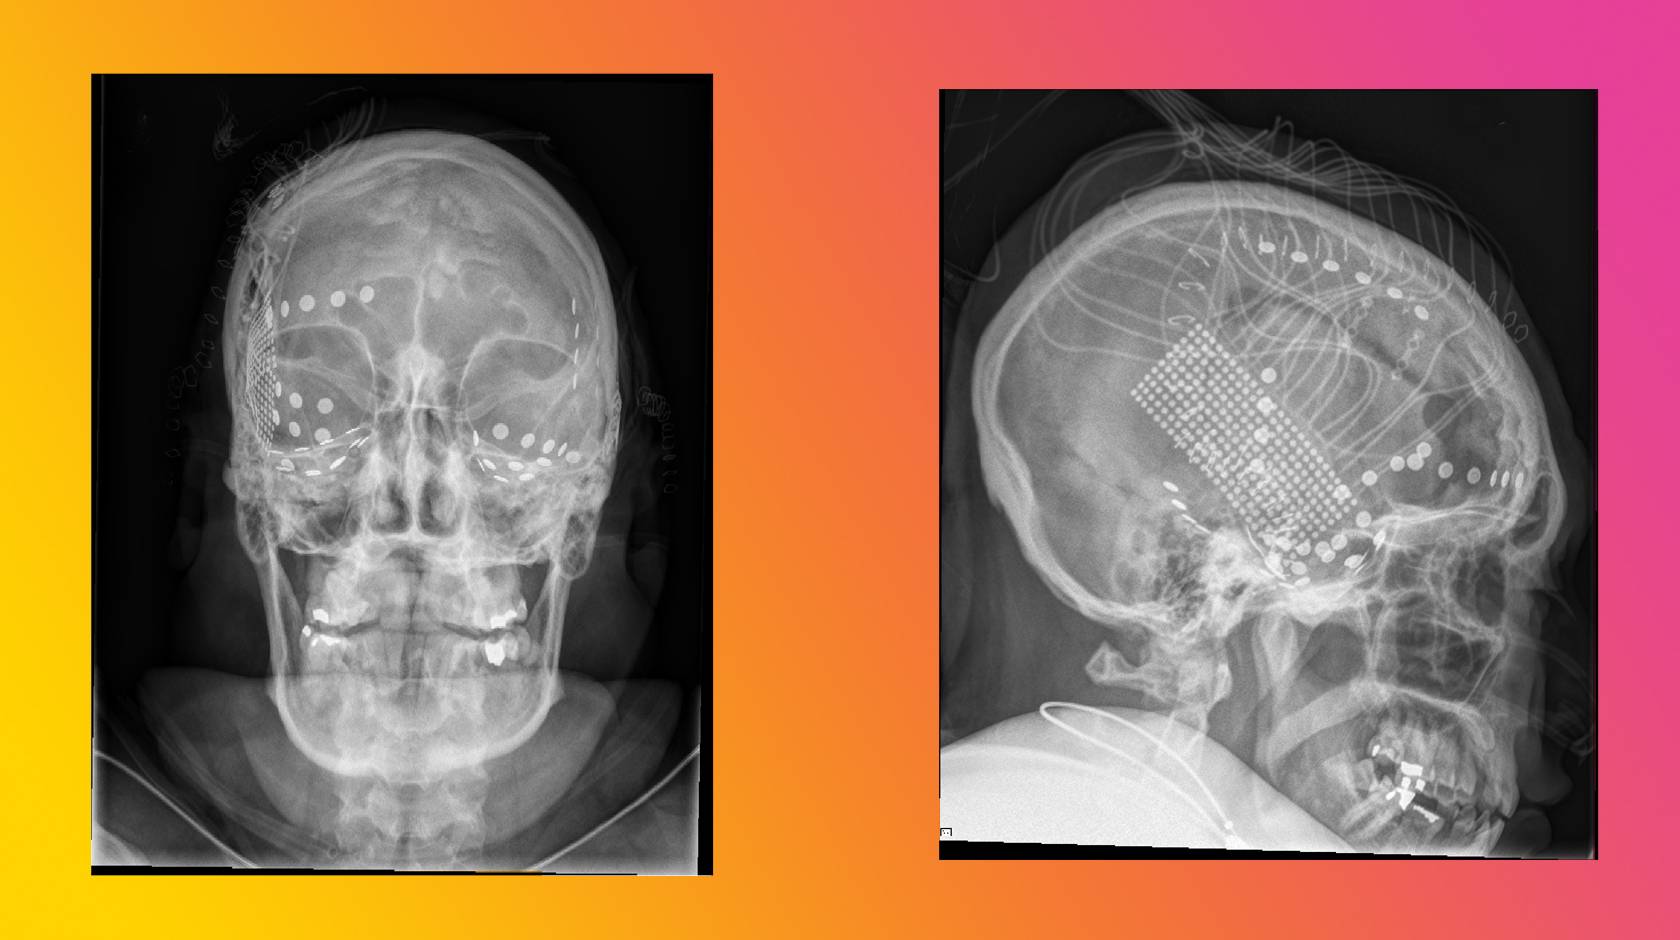 Head X-rays of subjects in the experiment